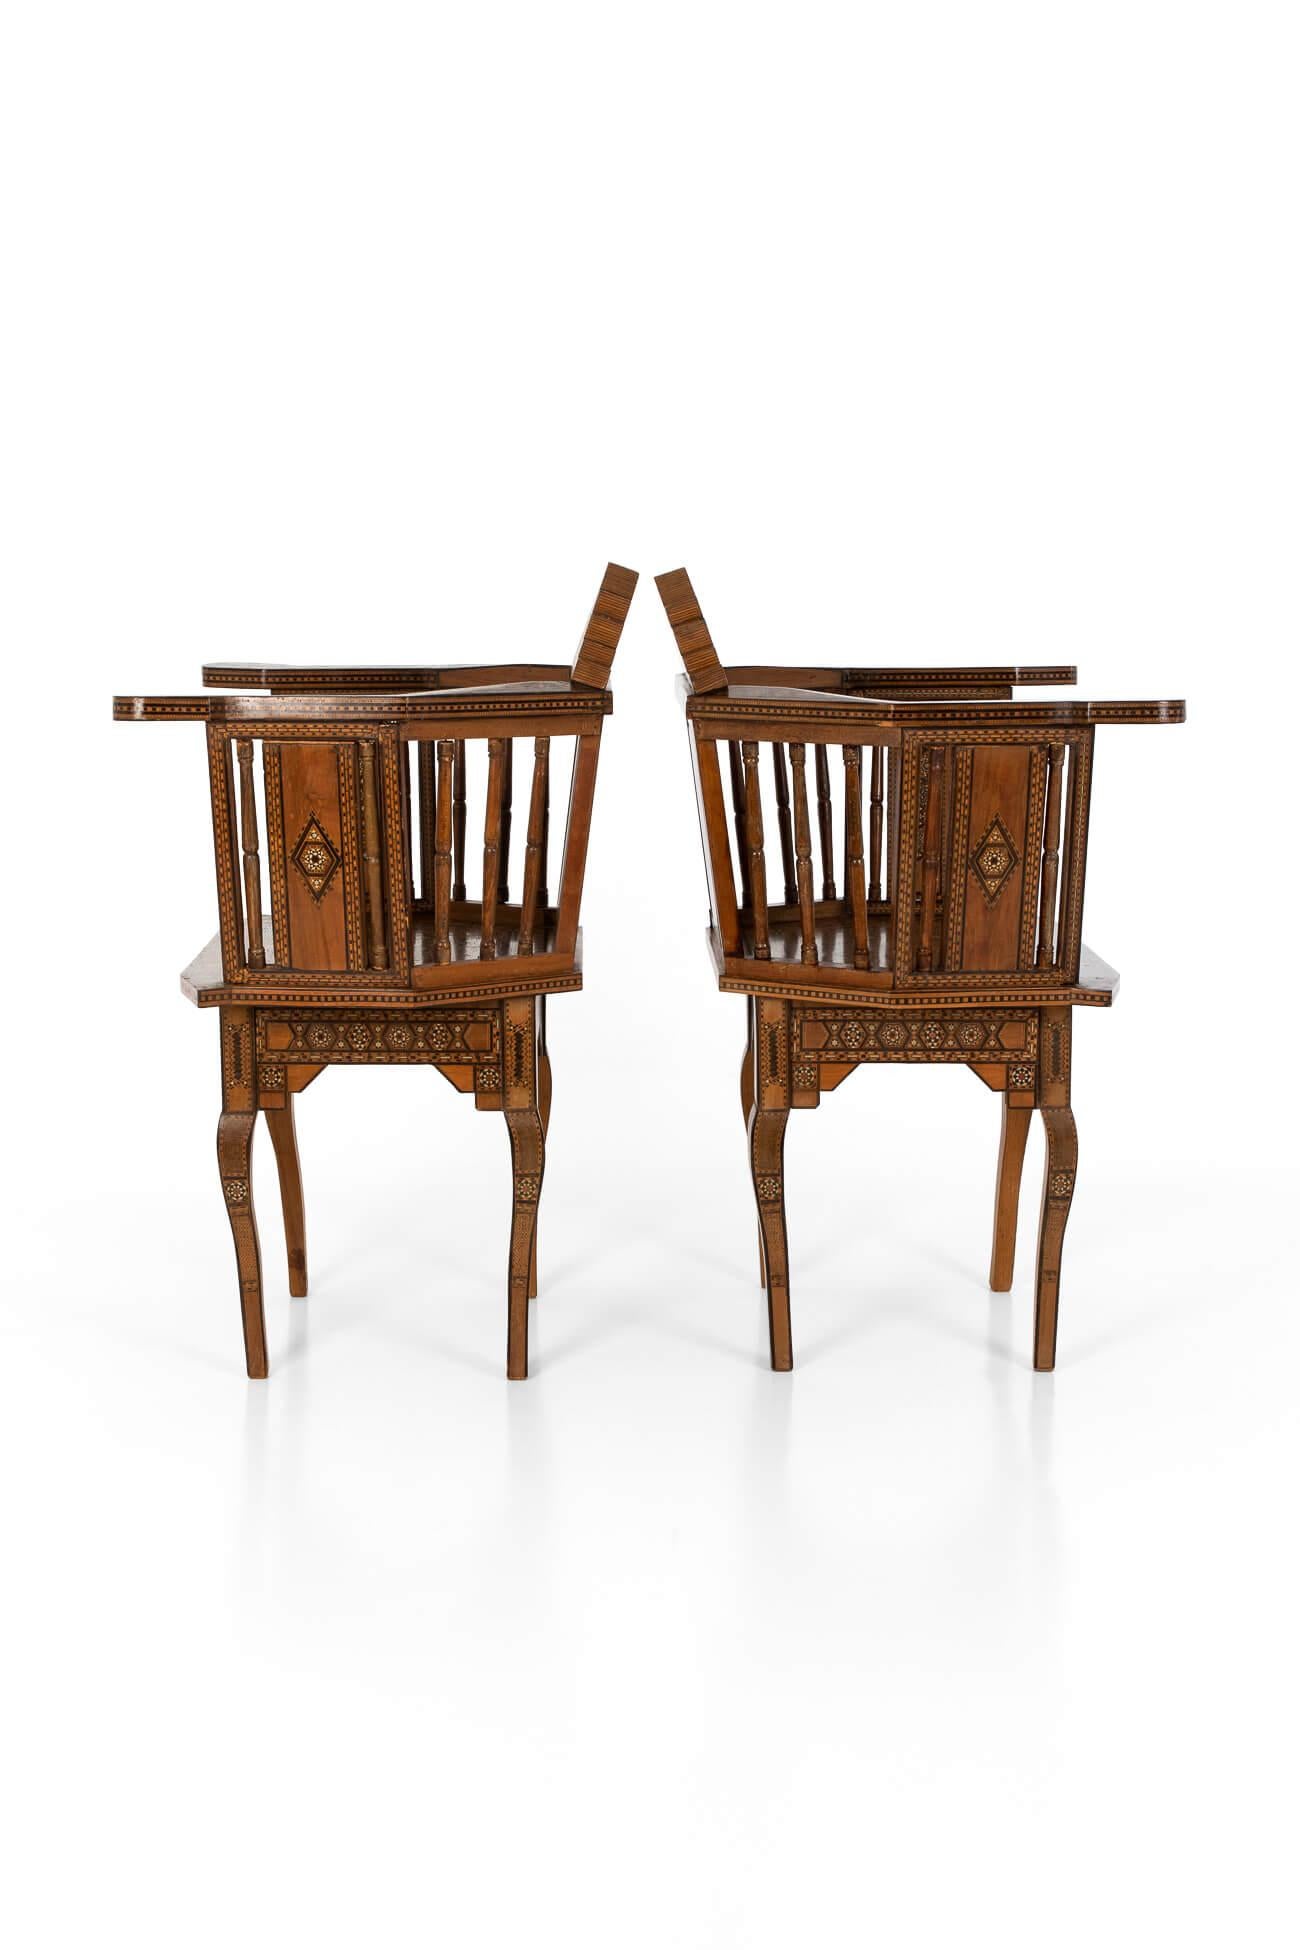 Syrian Pair of Parquetry Damascus Chairs For Sale